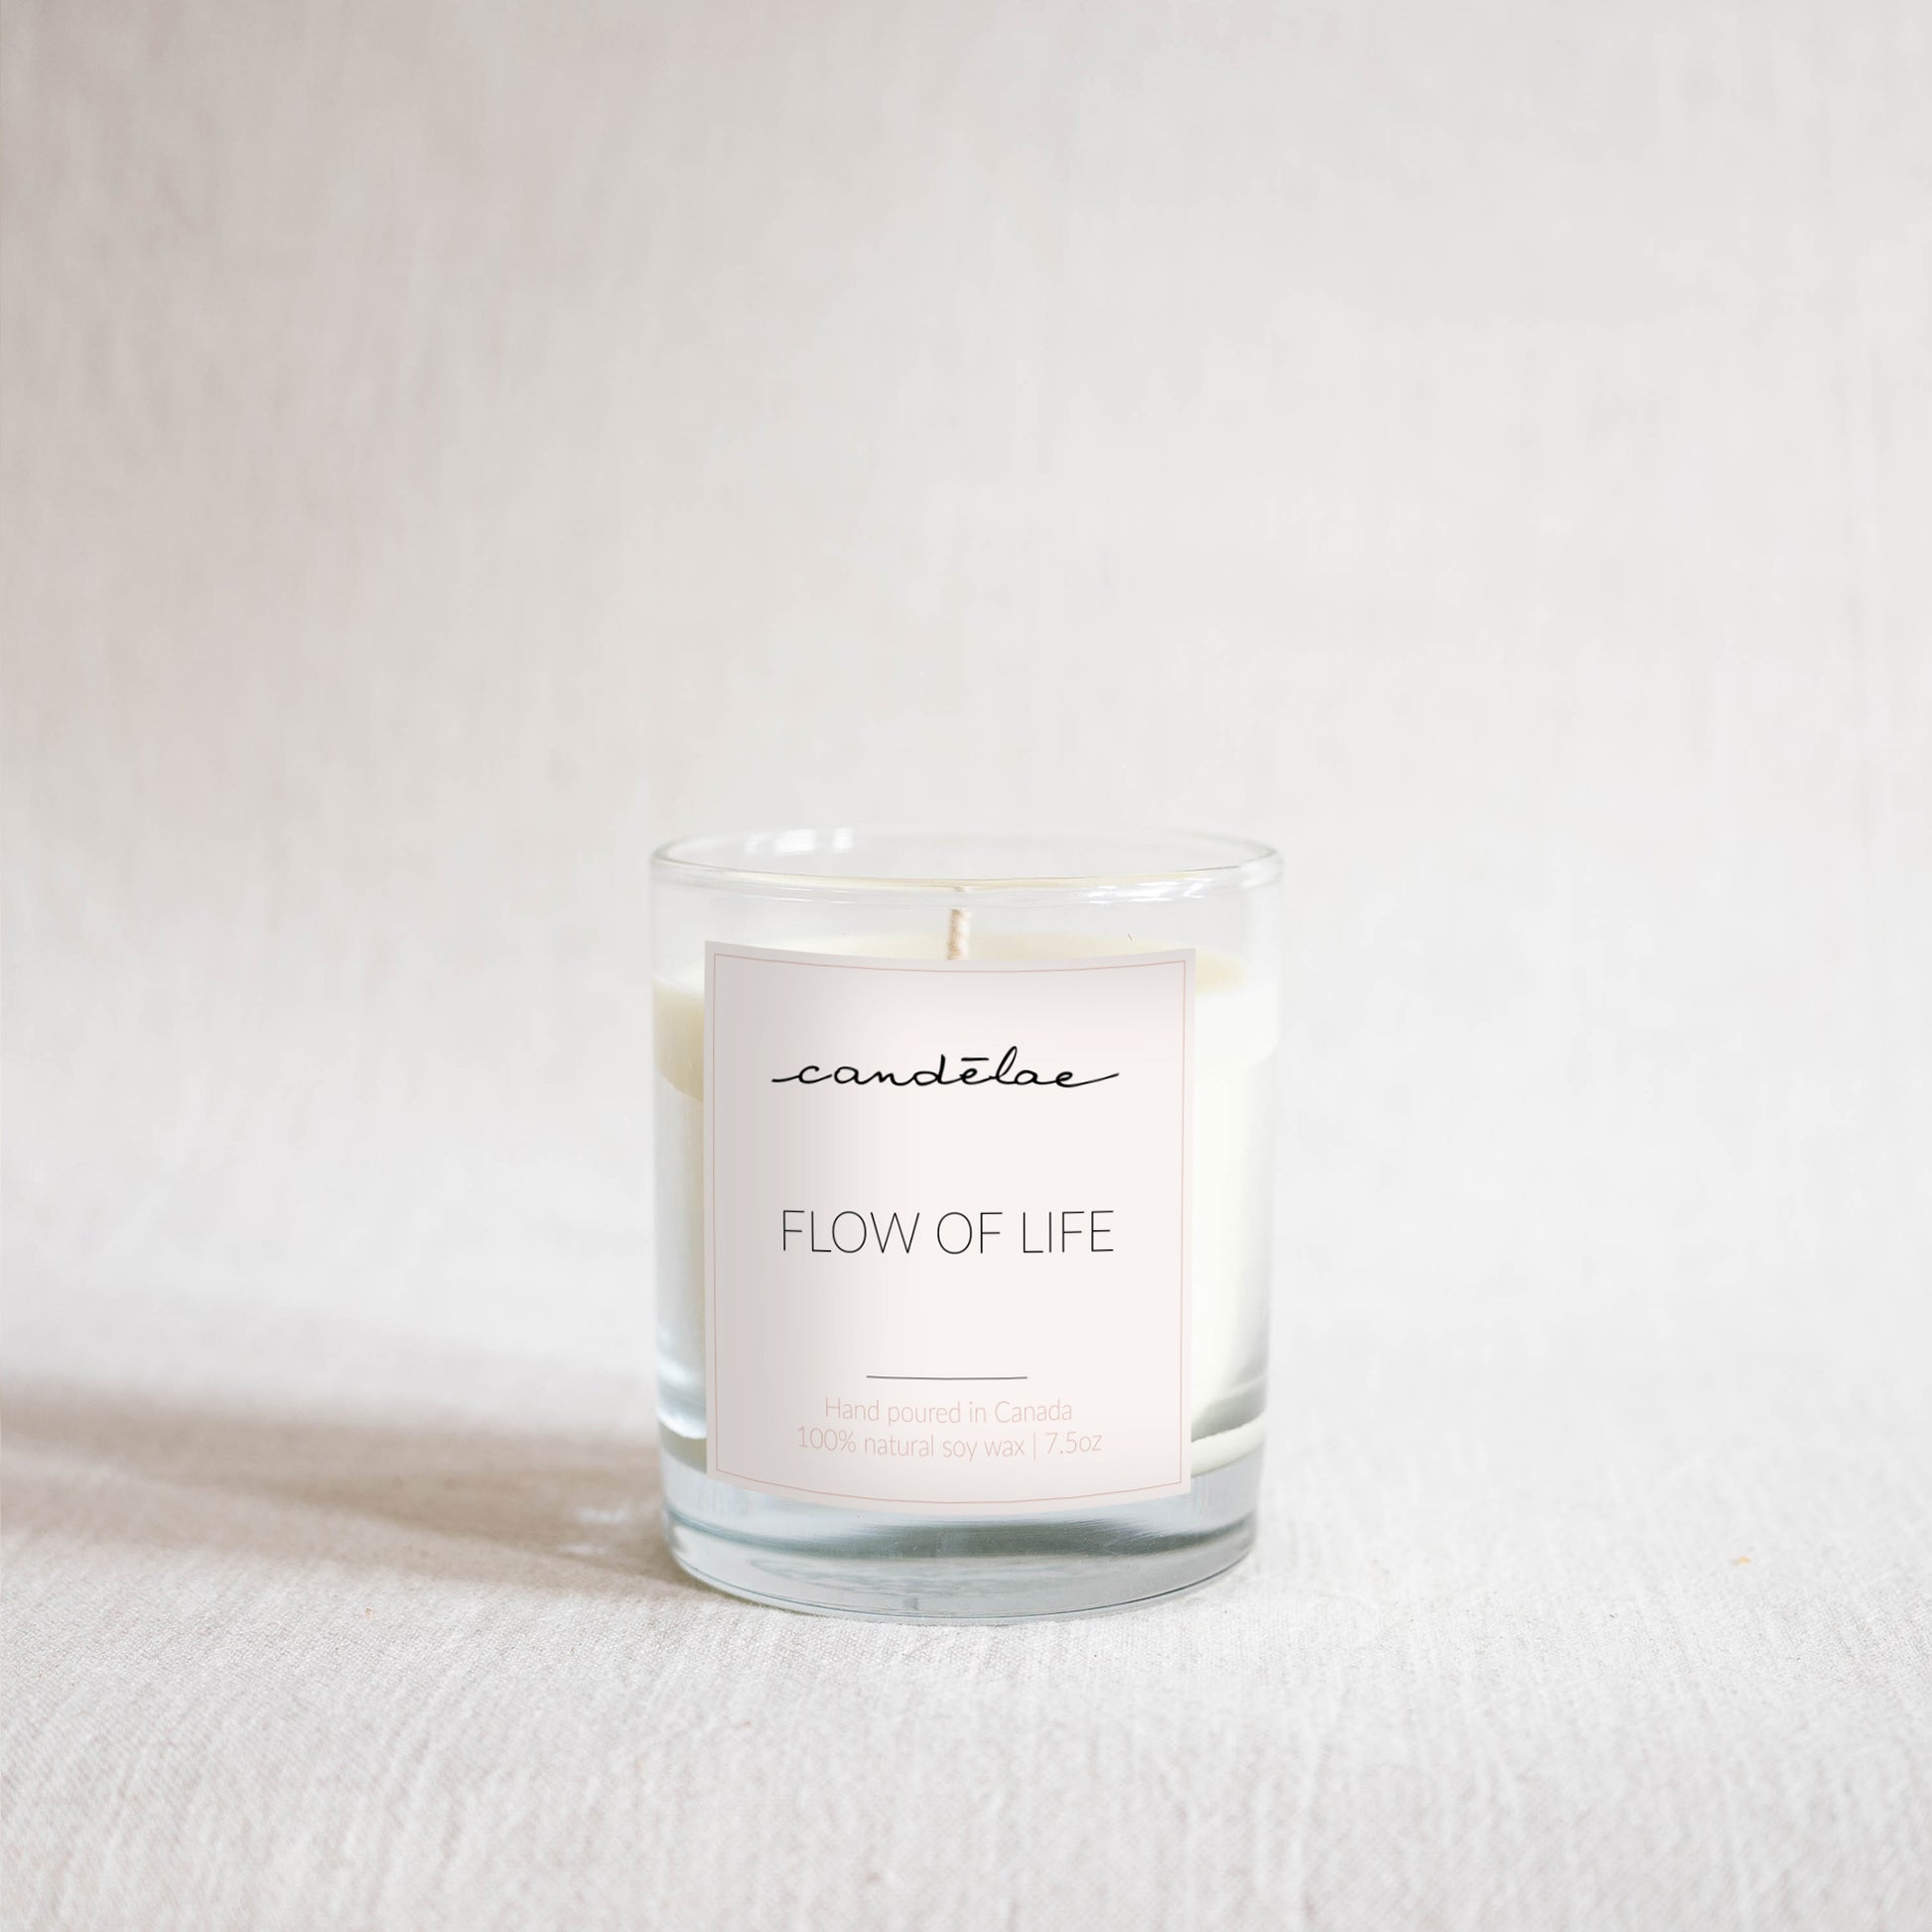 Flow of life candle from candelae.ca is set aside for its photoshoot